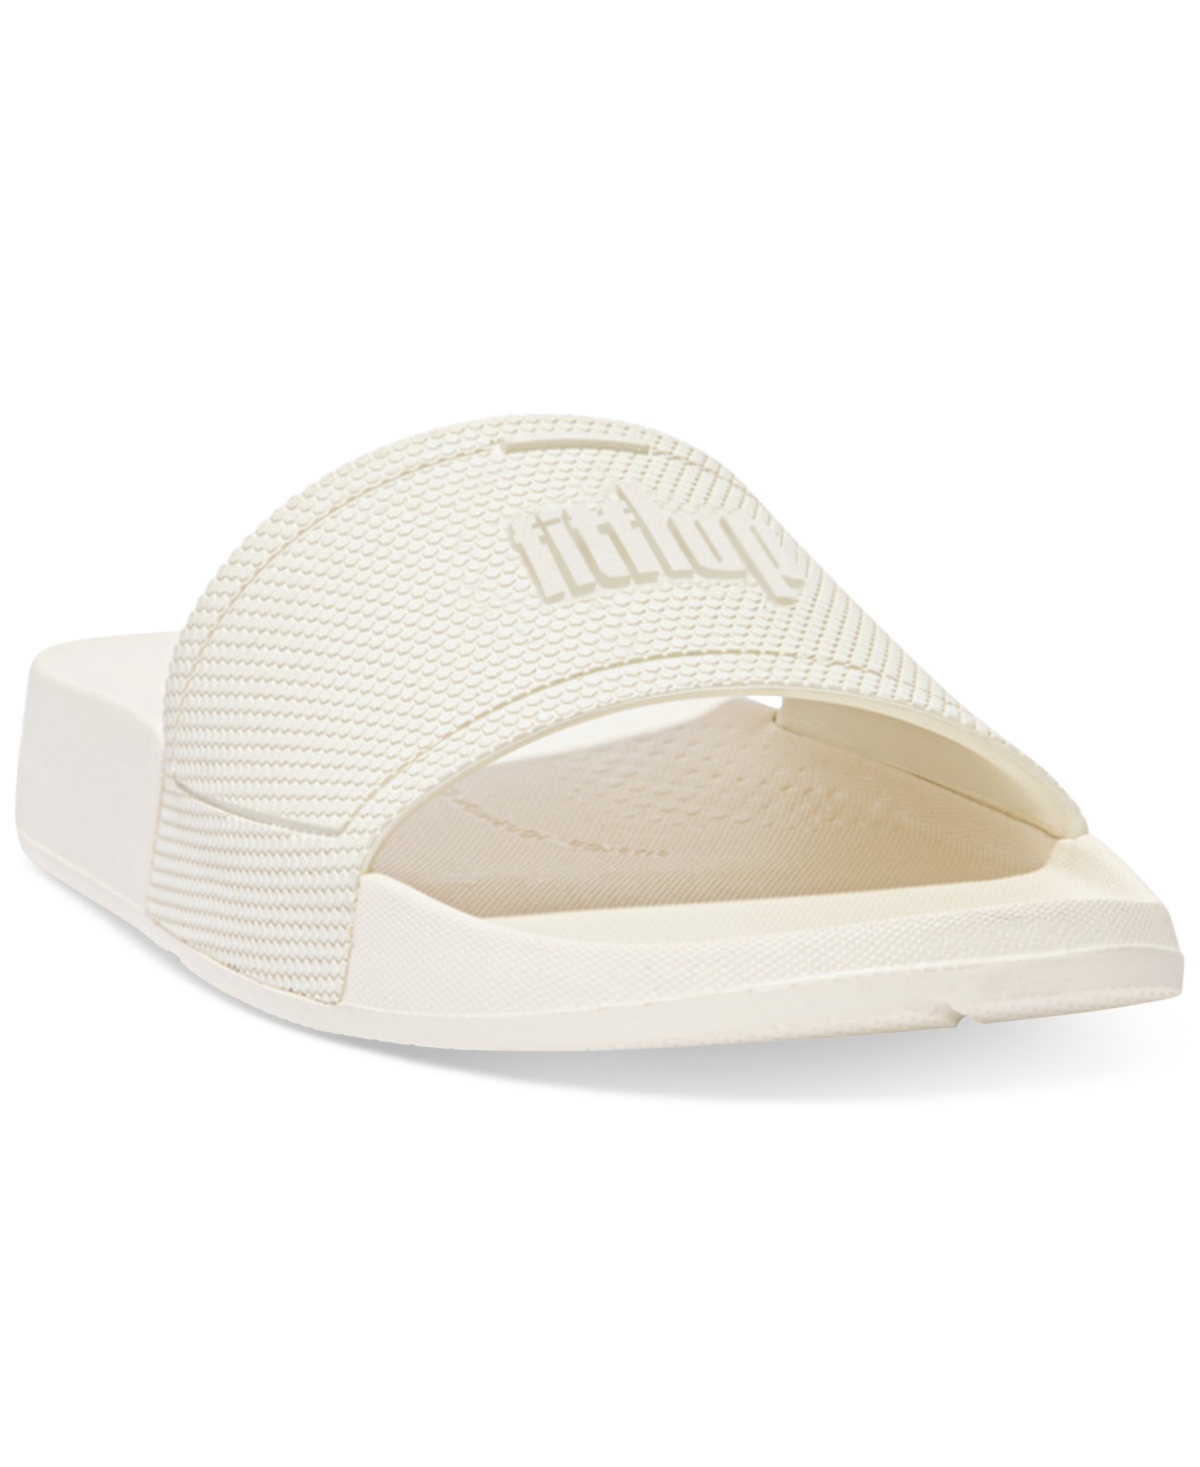 FITFLOP FITFLOP WOMEN'S IQUSHION SLIDES WOMEN'S SHOES